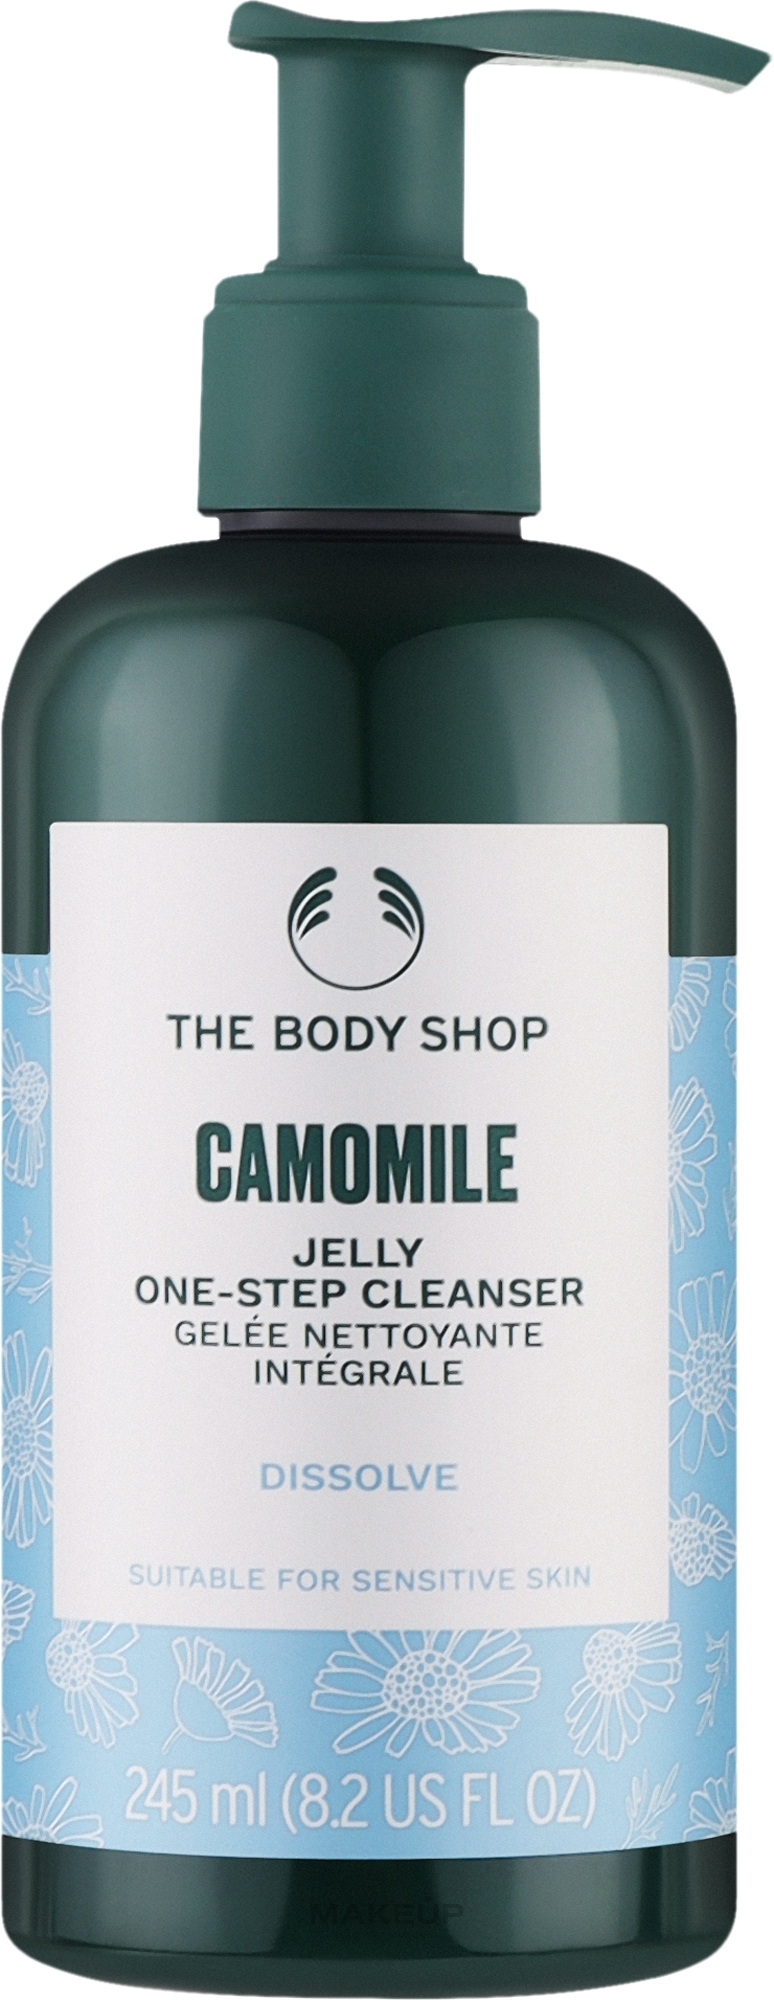 The Body Shop Camomile Jelly One-Step Cleanser - The Body Shop Camomile Jelly One-Step Cleanser — фото 245ml